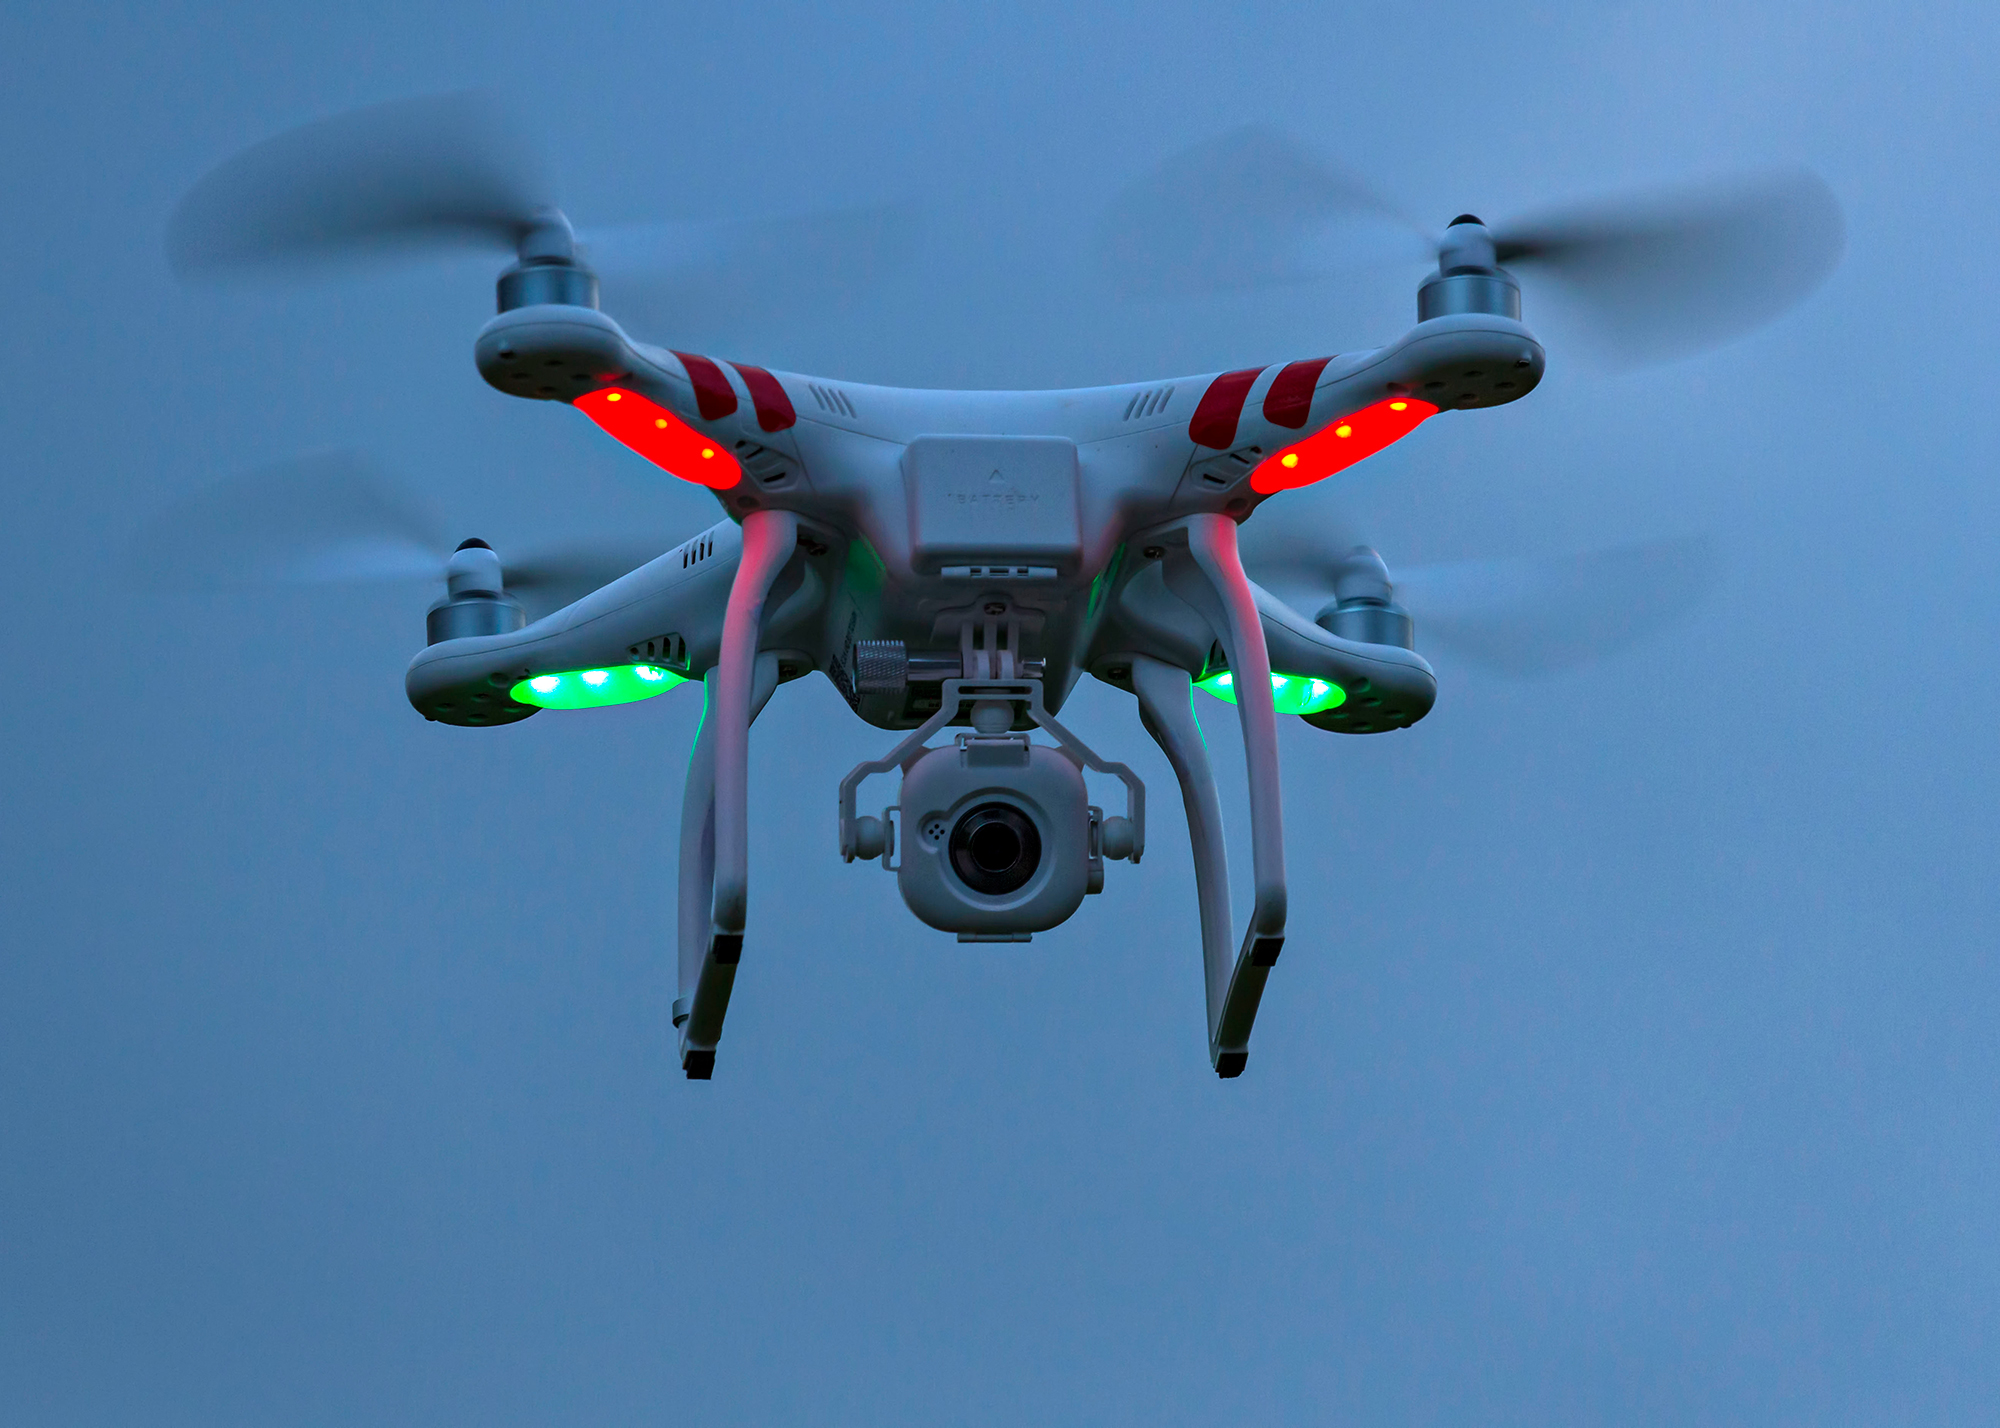 Complaints to Police over Drones up by 2,000%